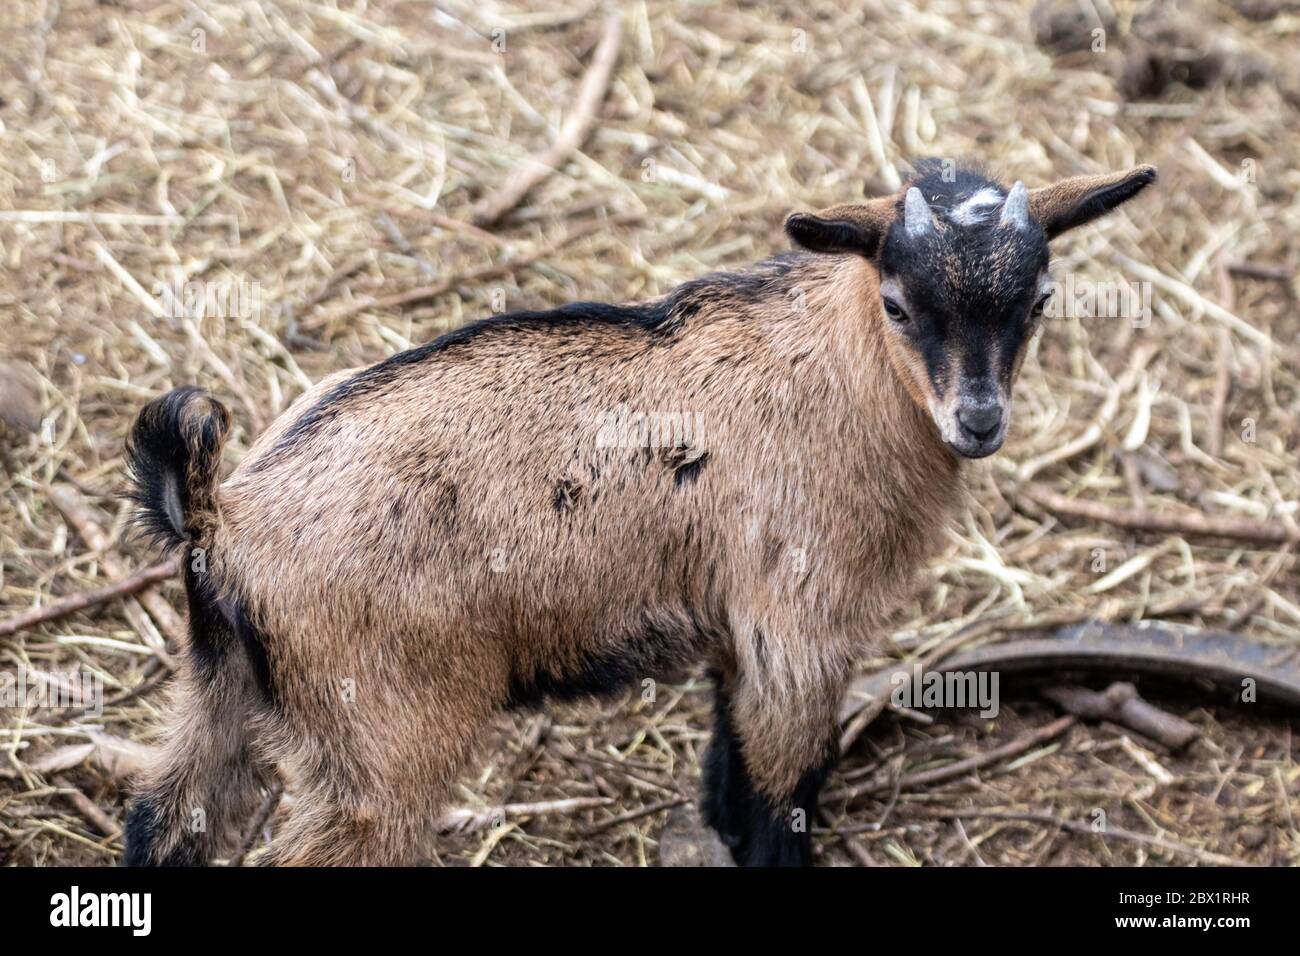 A cute young baby brown goat standing on straw in an animal farm yard Stock Photo